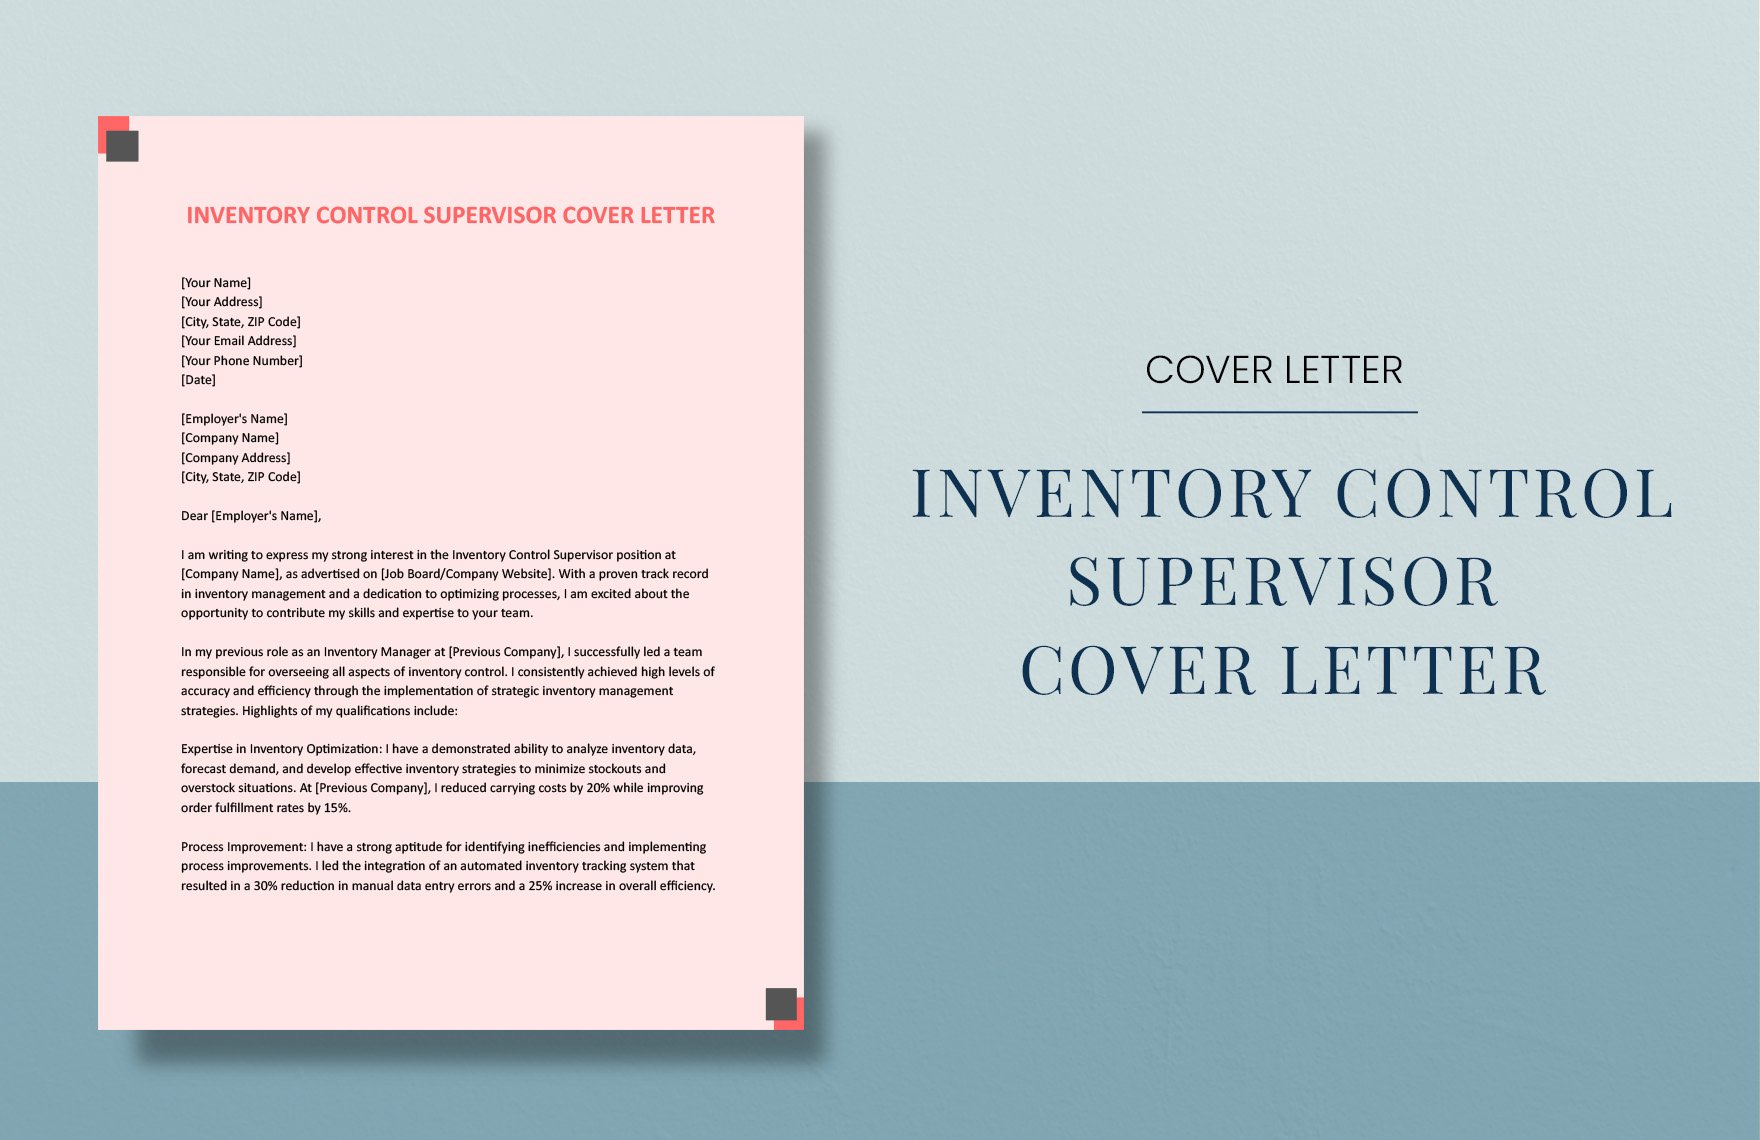 Inventory Control Supervisor Cover Letter